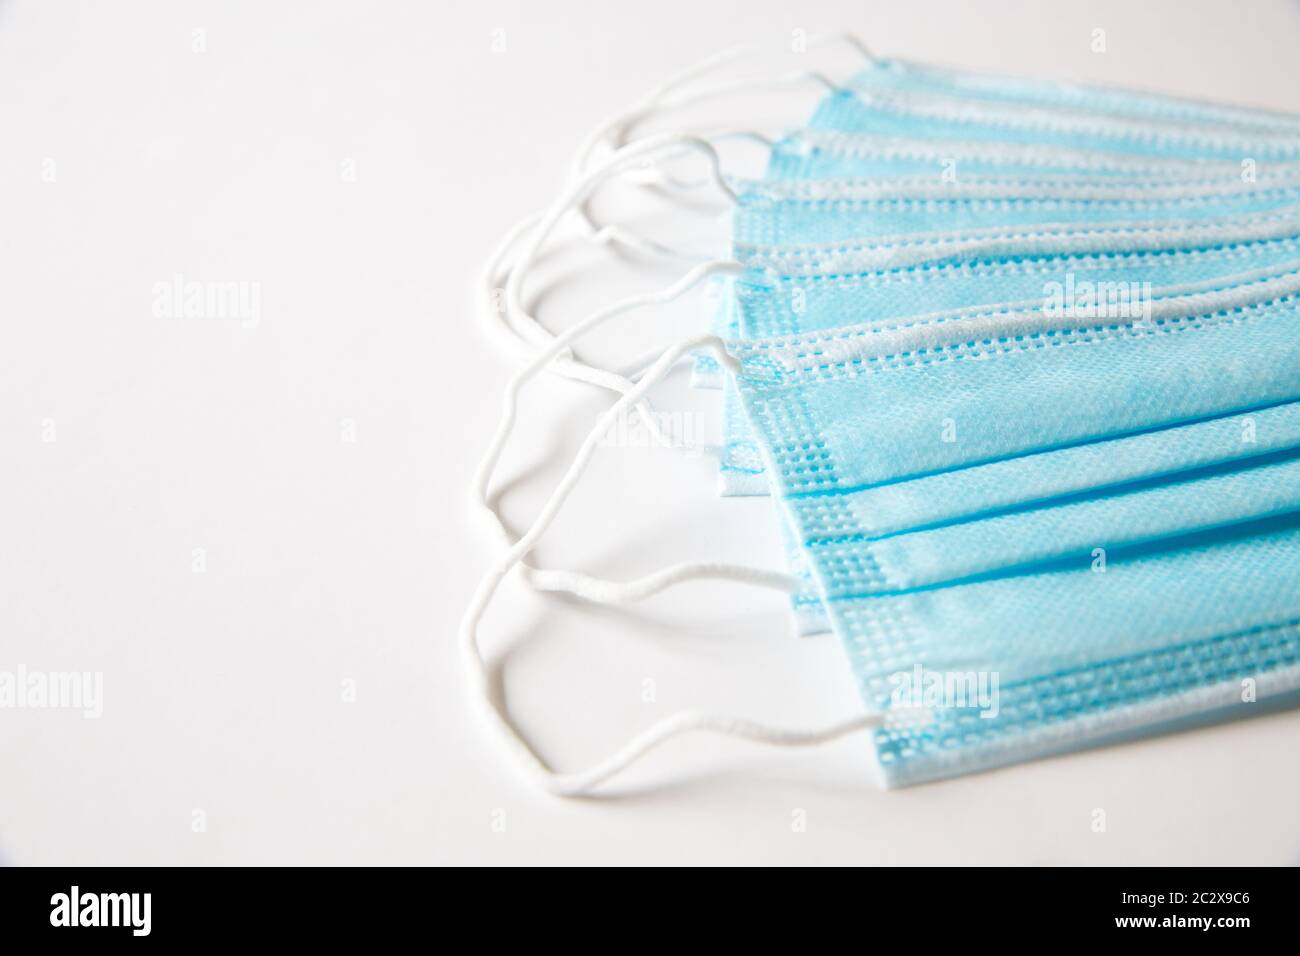 An example of blue surgical face mask used to protect the public from infectious diseases such as Coronavirus. Stock Photo